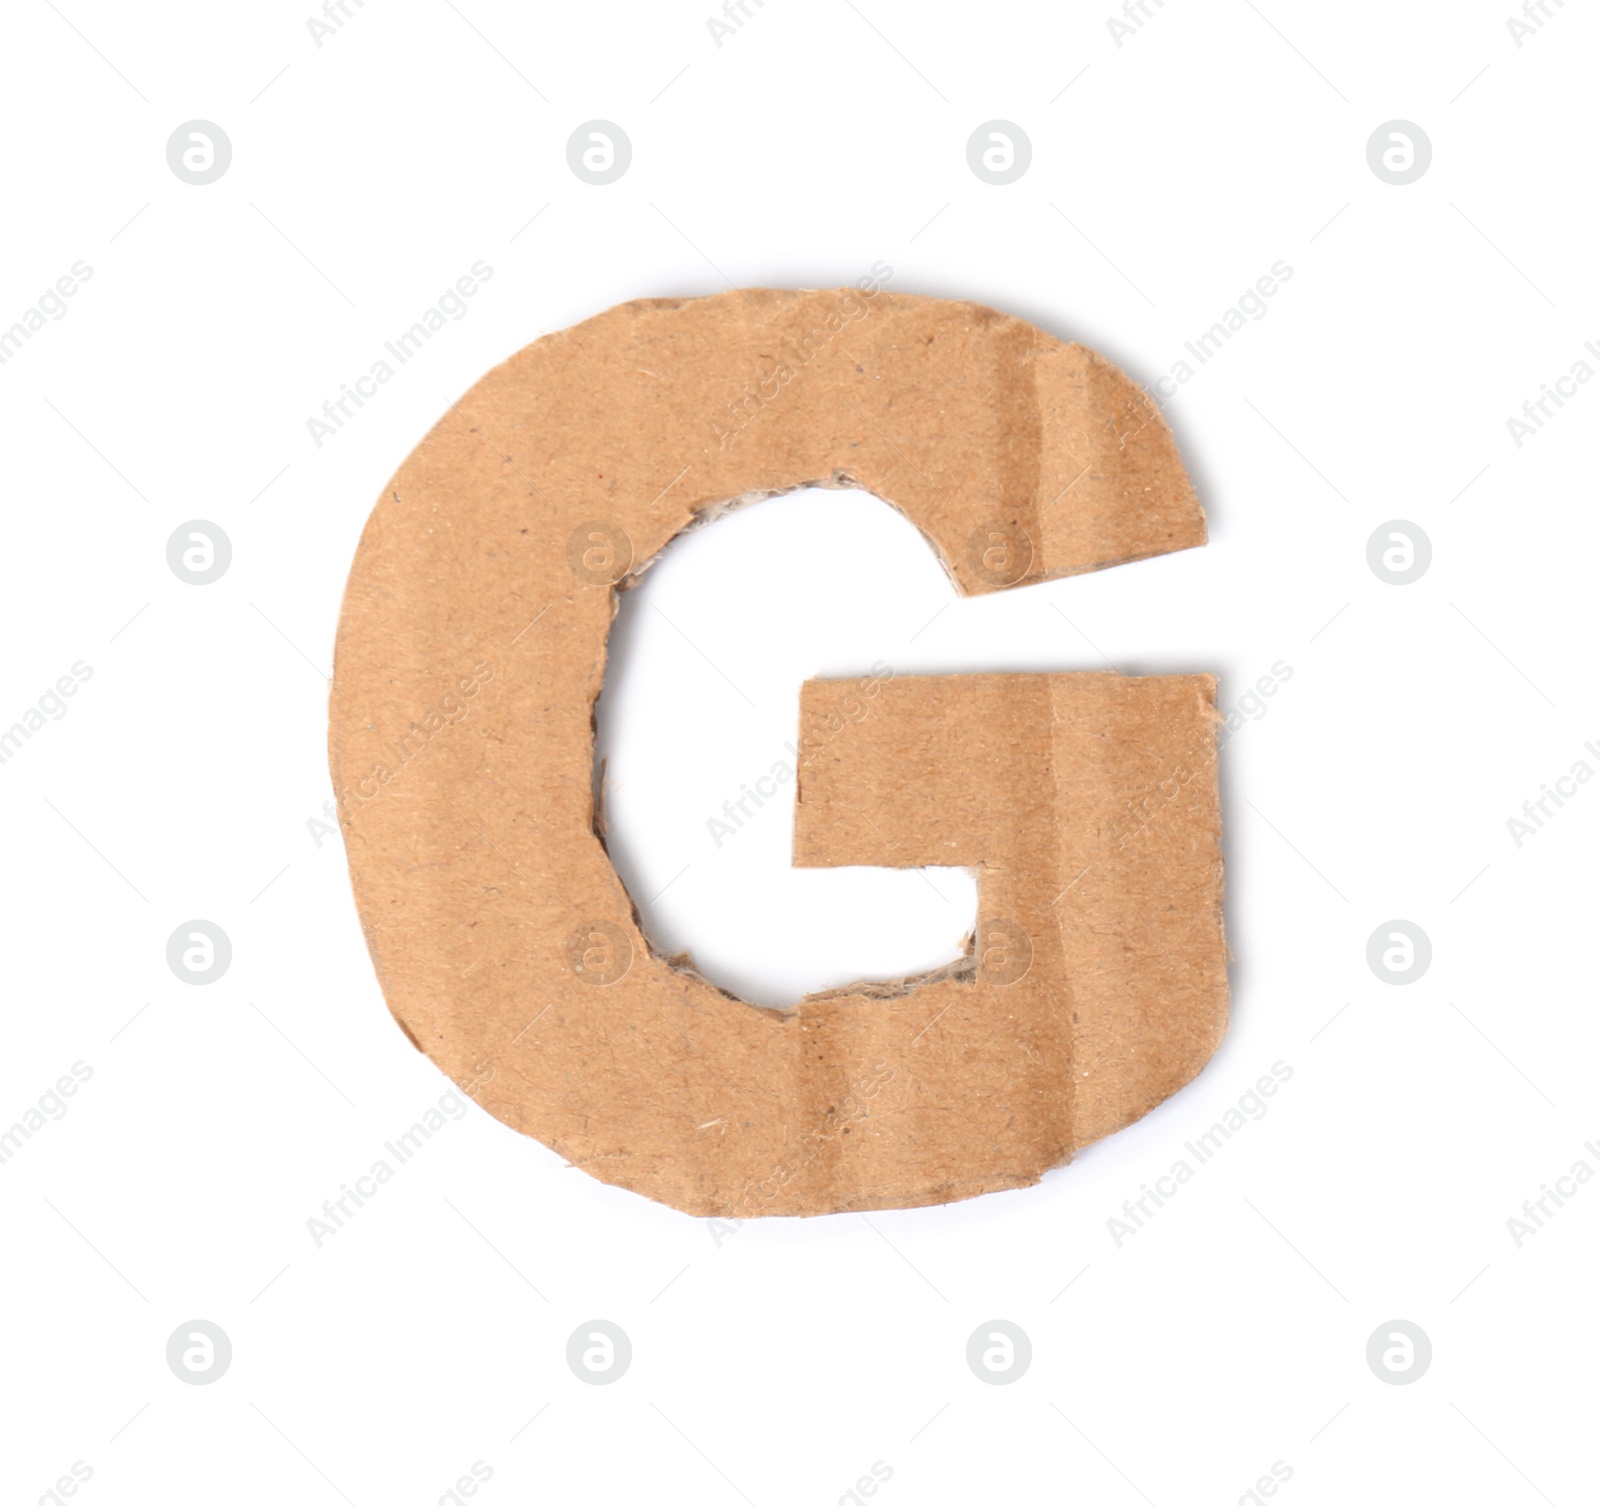 Photo of Letter G made of cardboard on white background